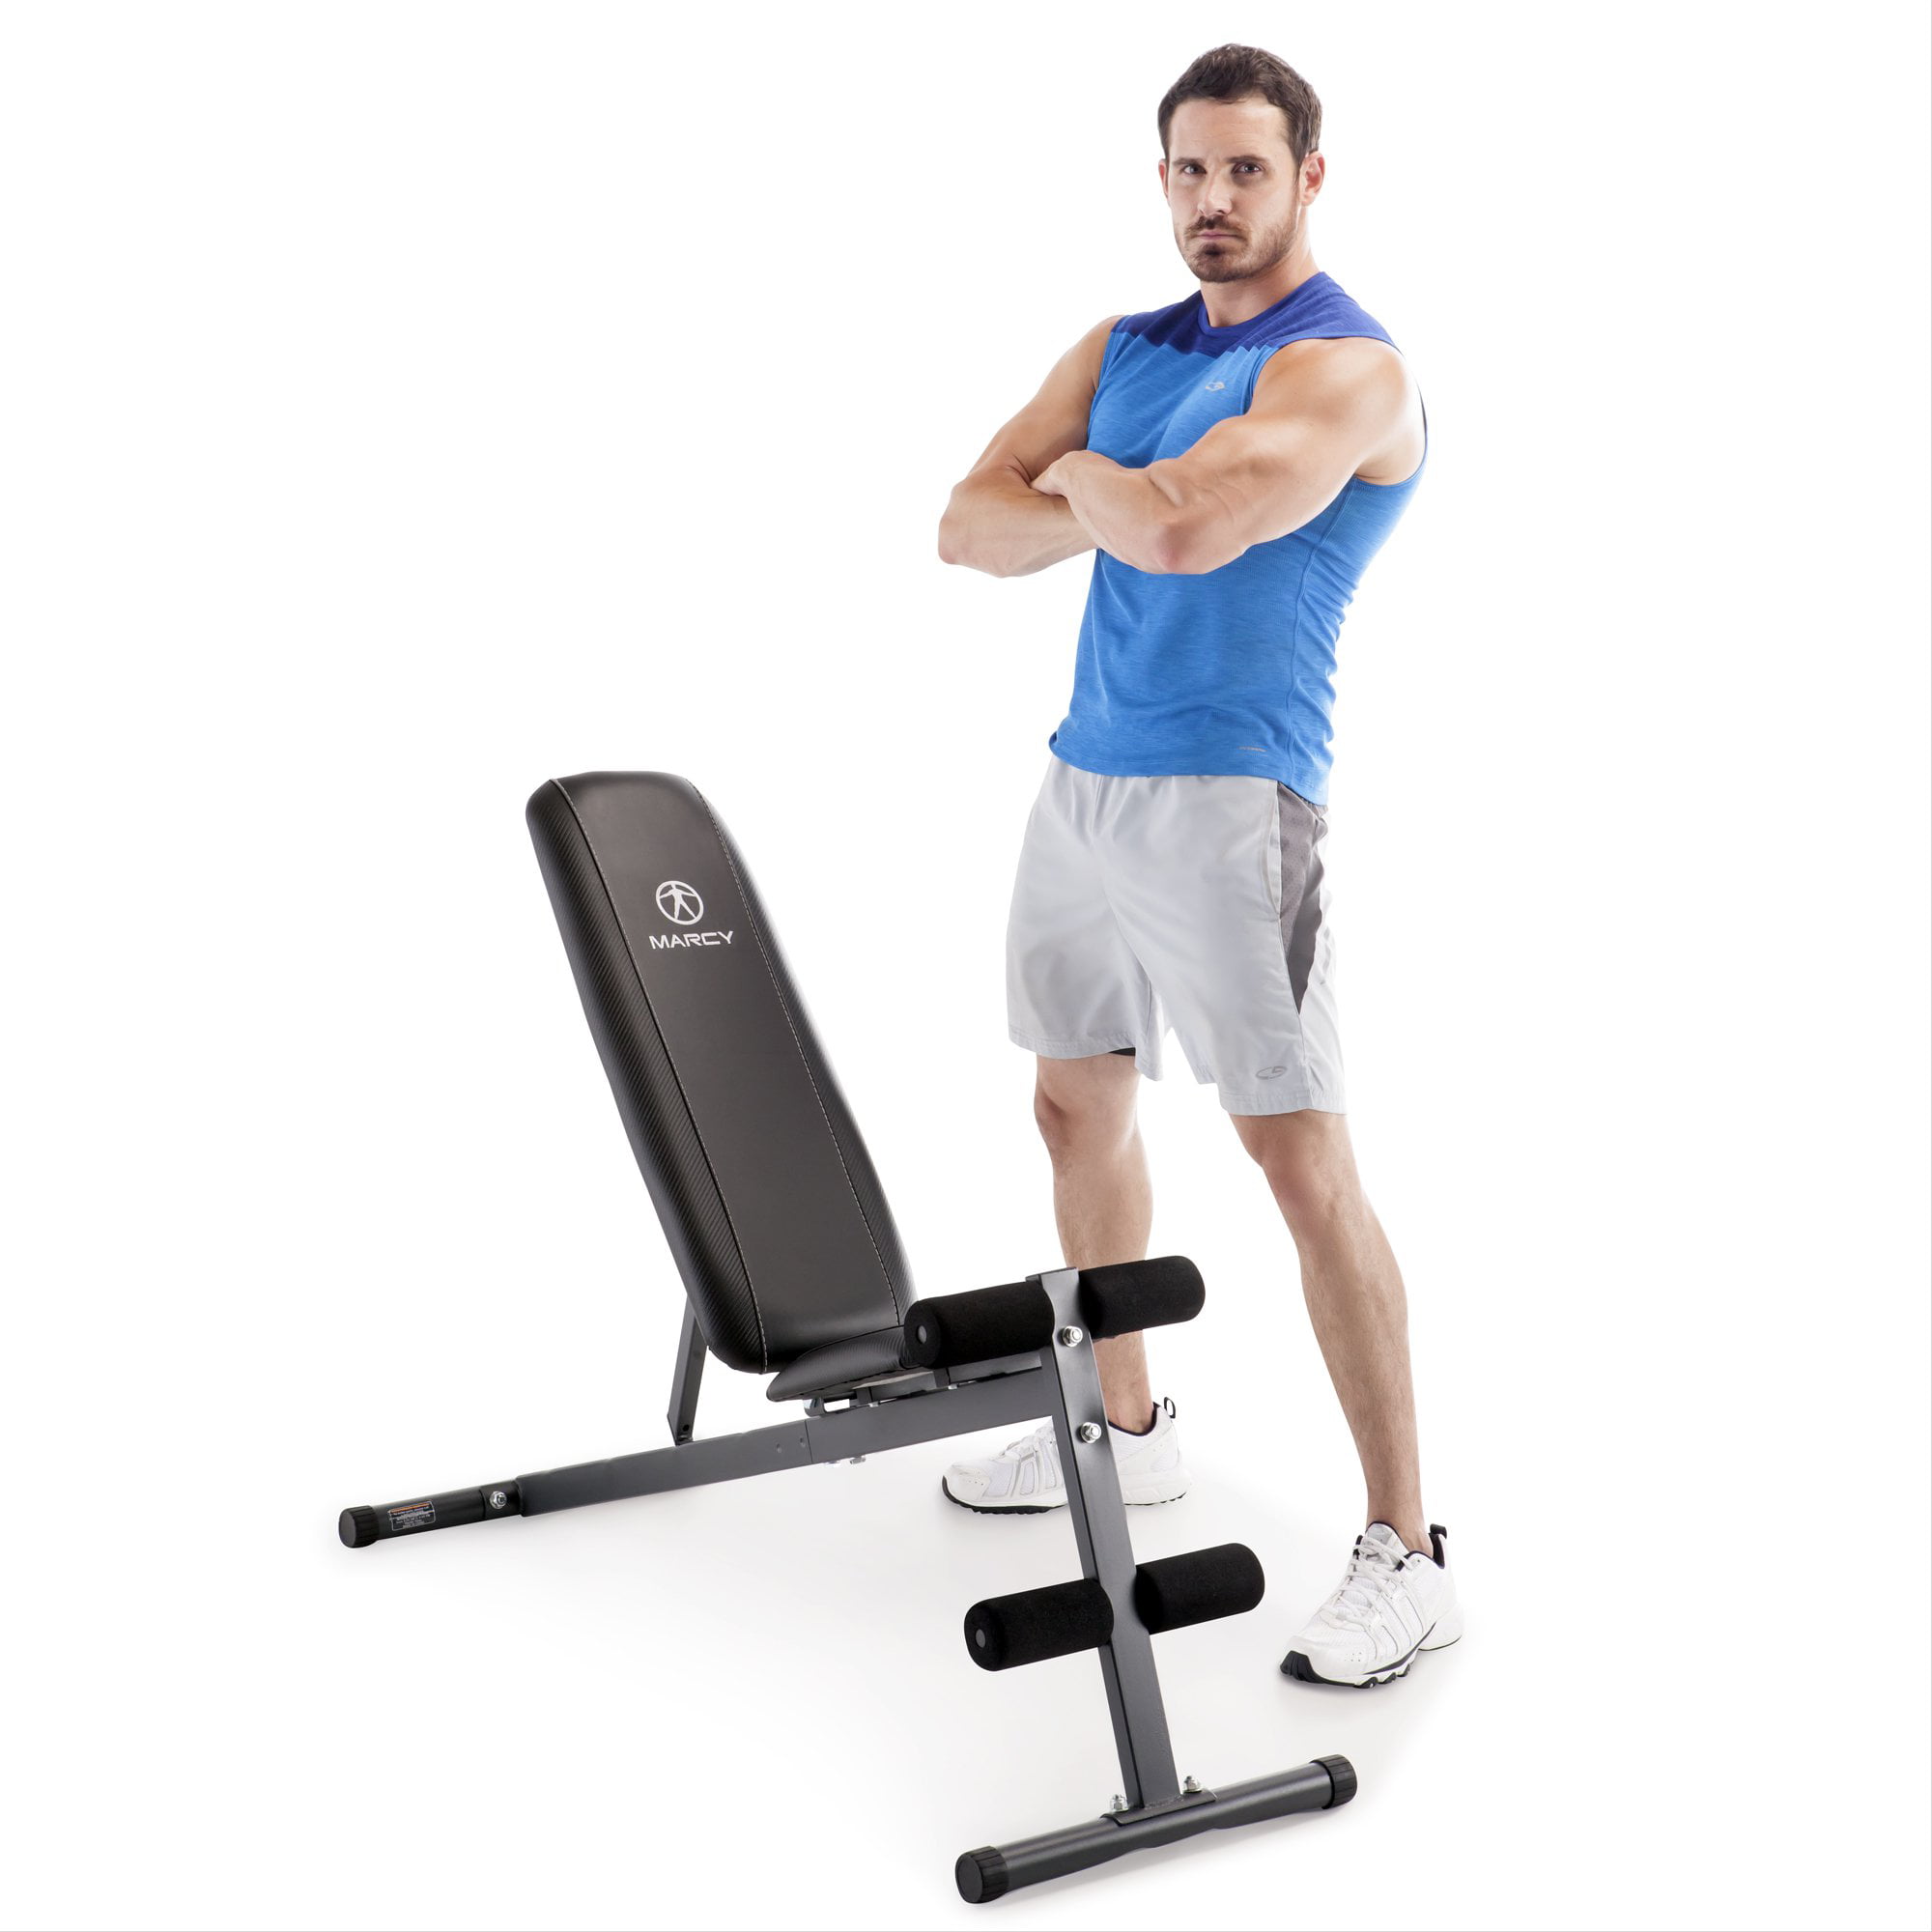 Weight Bench Multi-Position Adjustable Workout Utility Bench Home Gym Fitness 